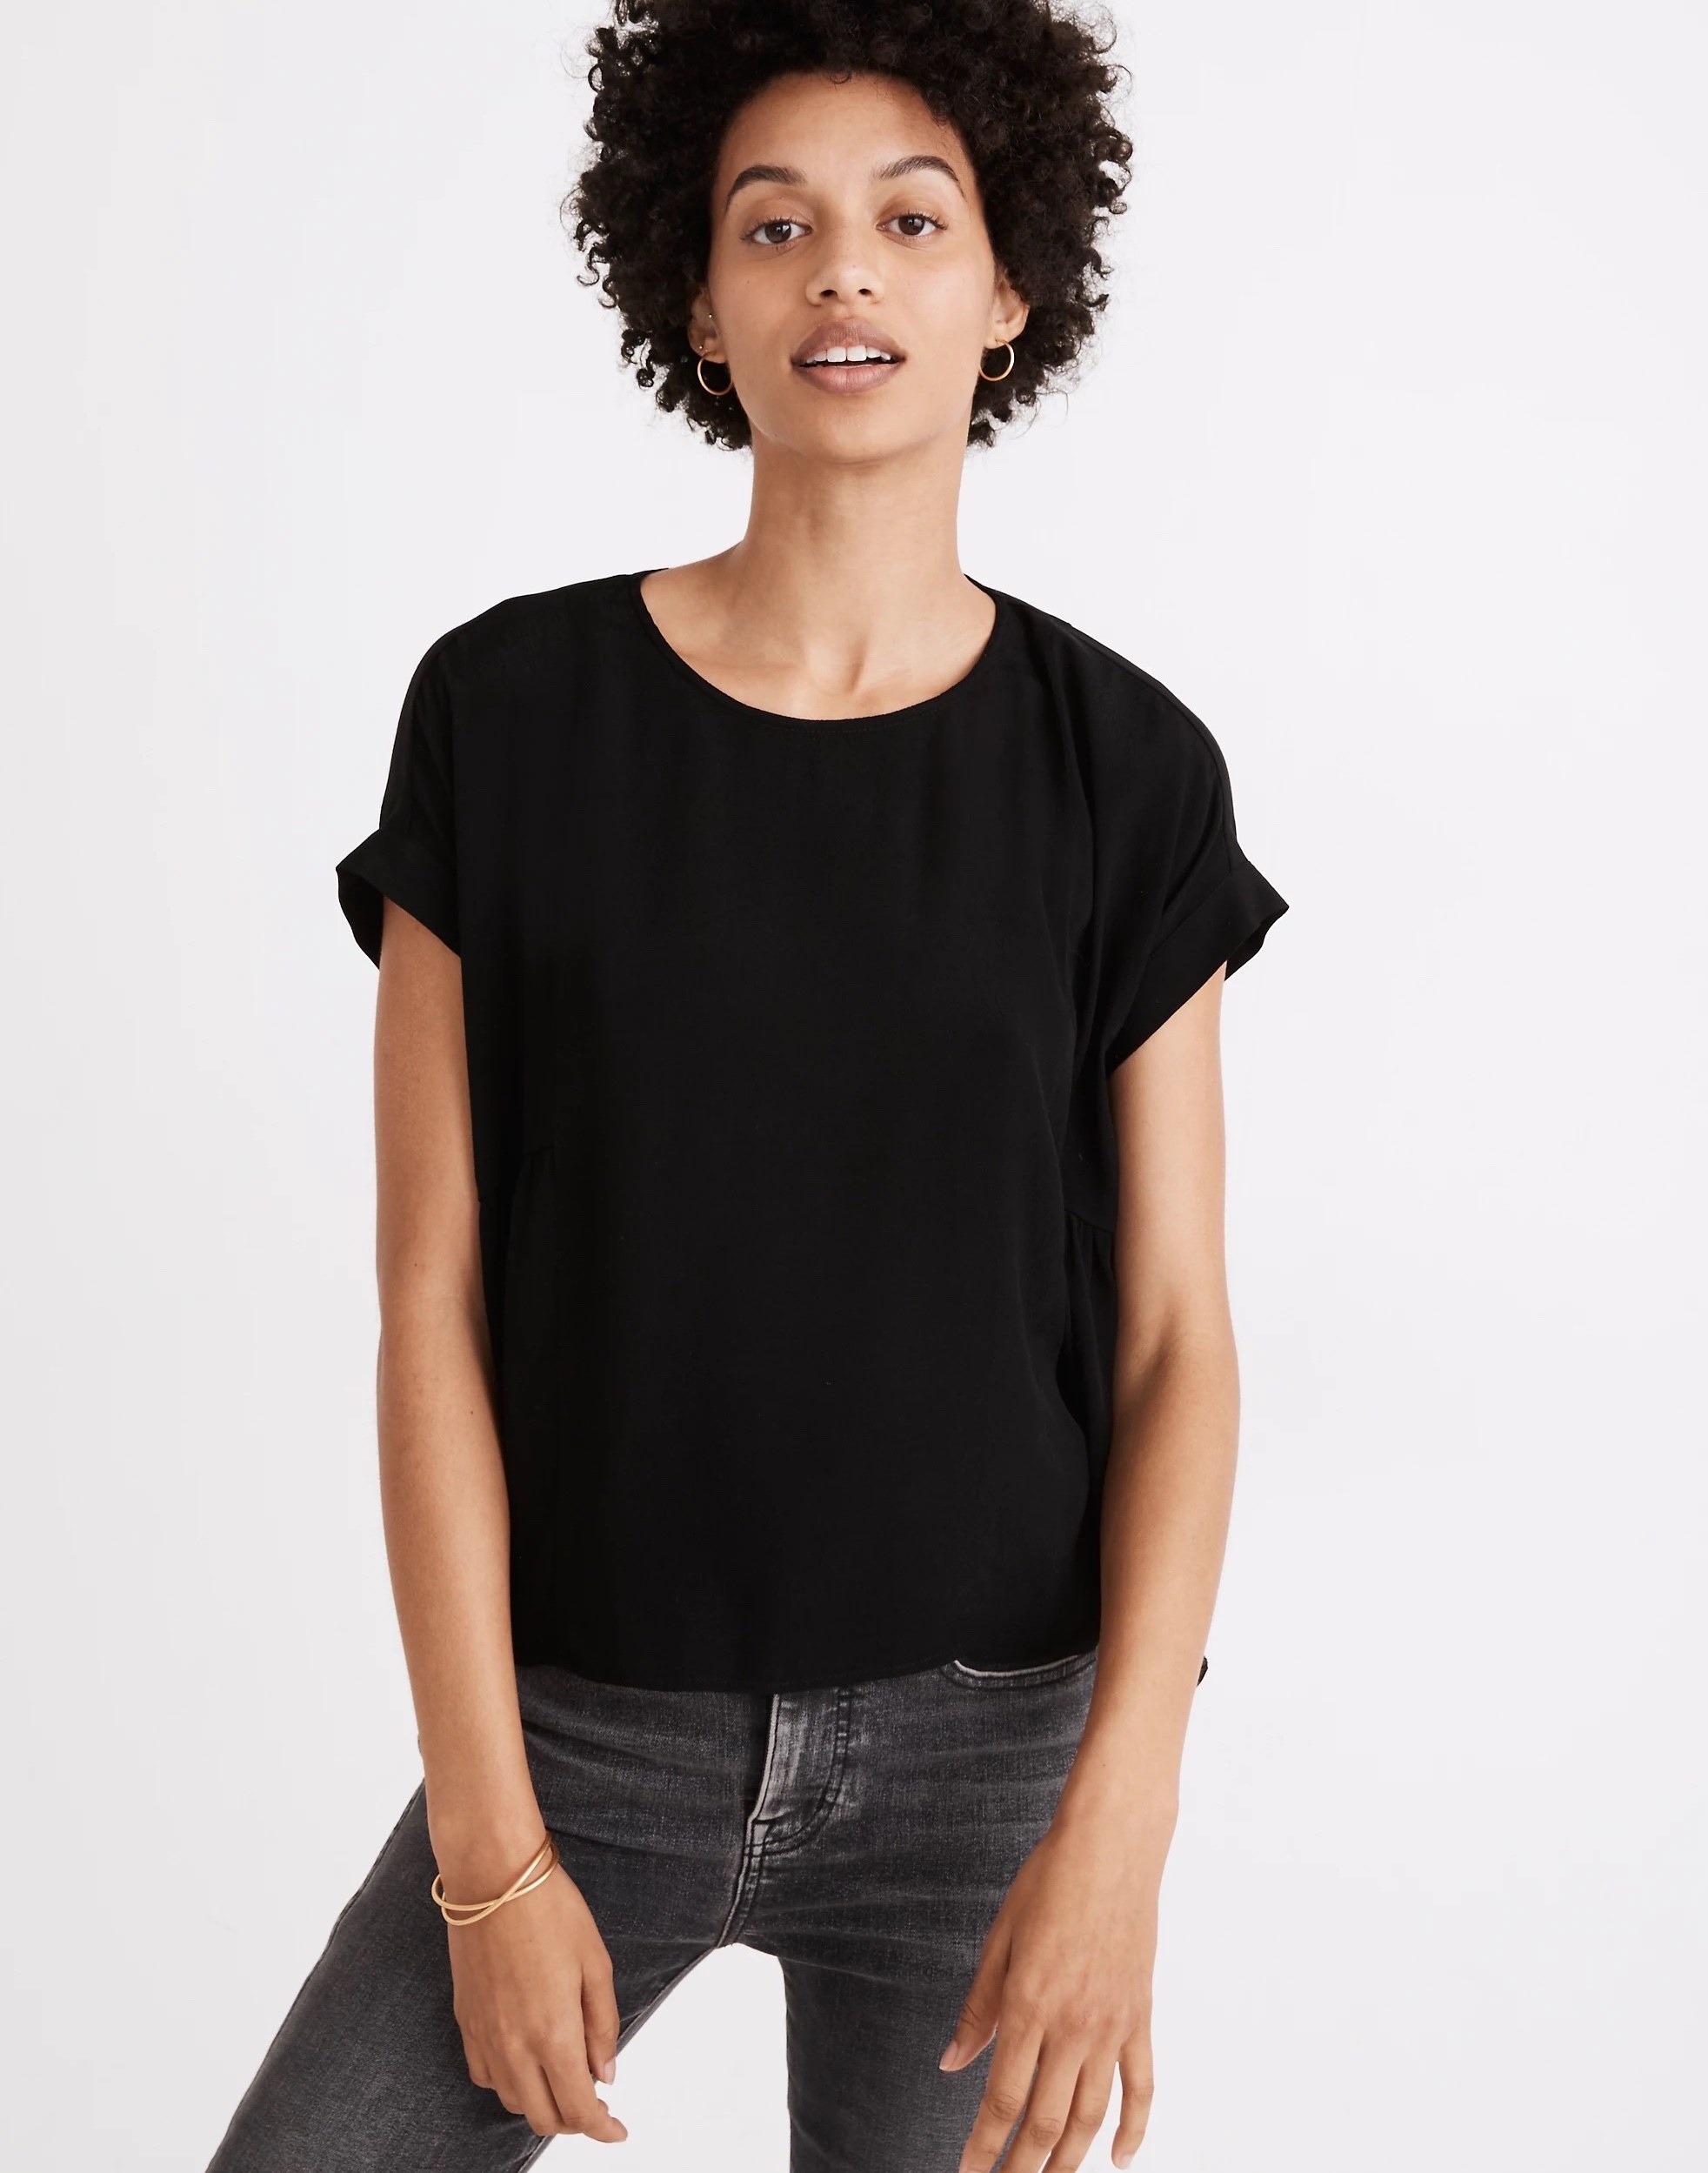 Model wearing black tee shirt with black jeans